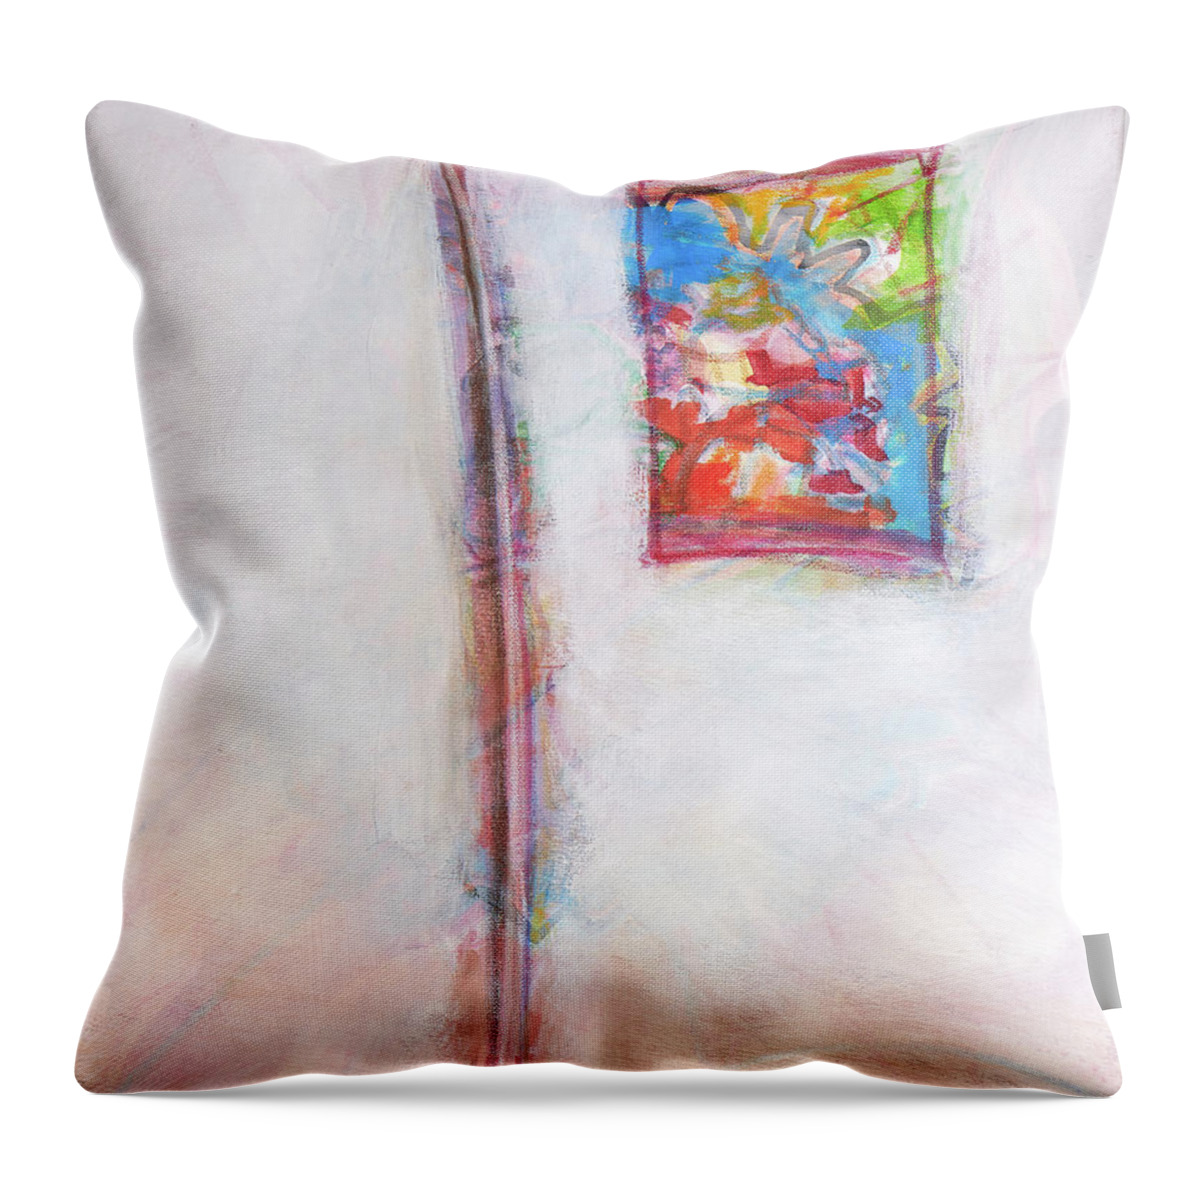  Throw Pillow featuring the painting Two-fold by Britta Burmehl